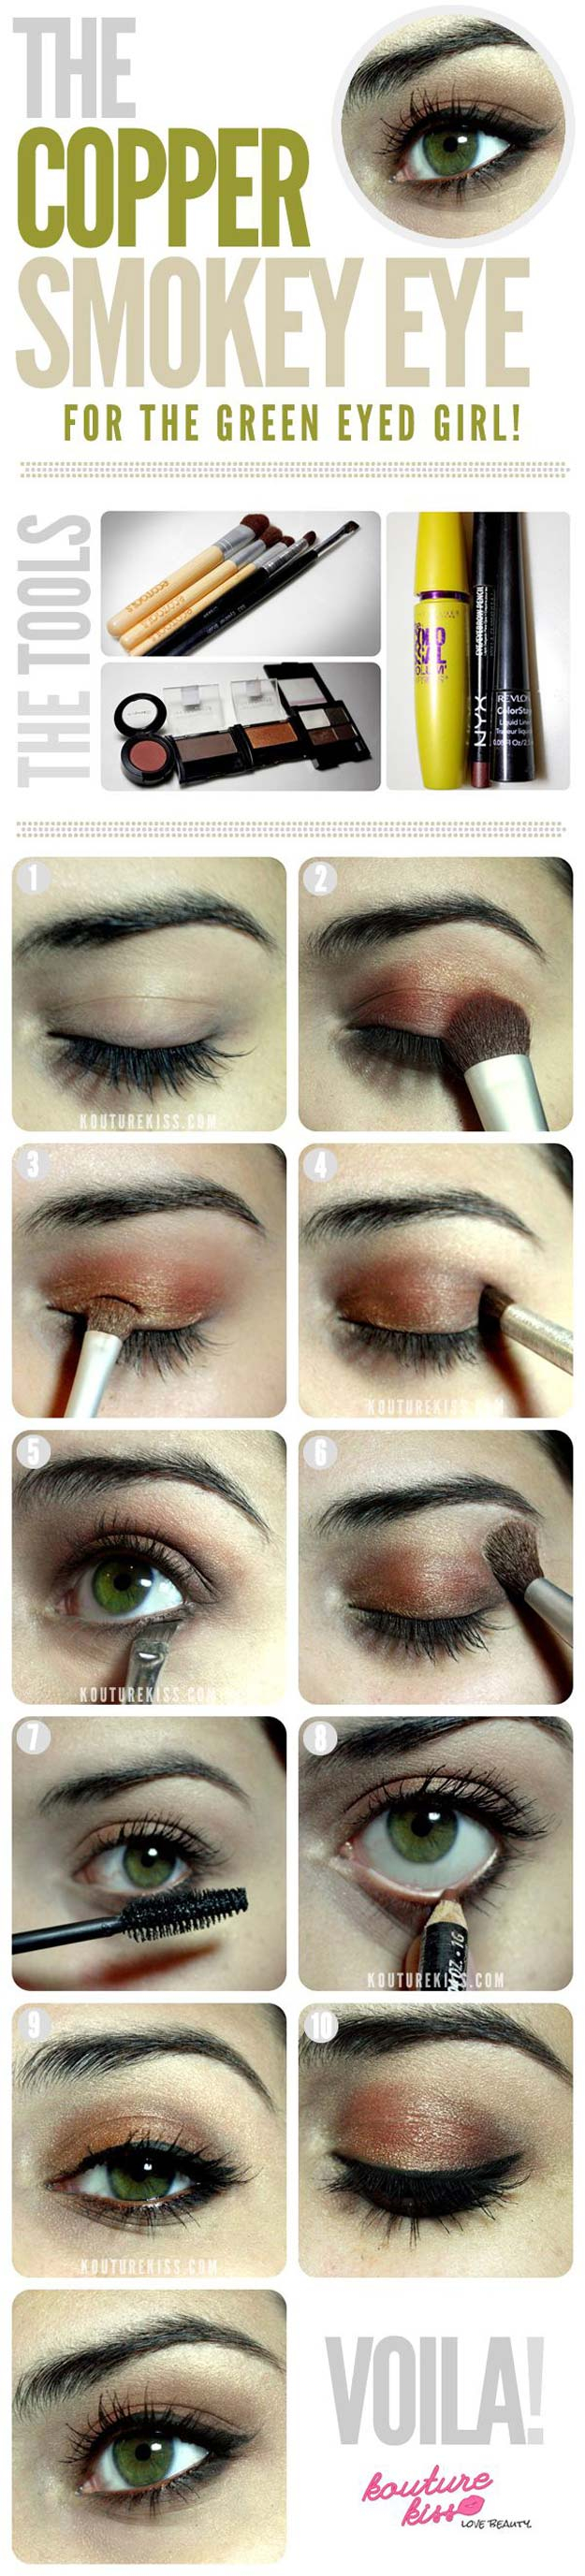 Homecoming Makeup Brown Eyes 38 Makeup Ideas For Prom The Goddess